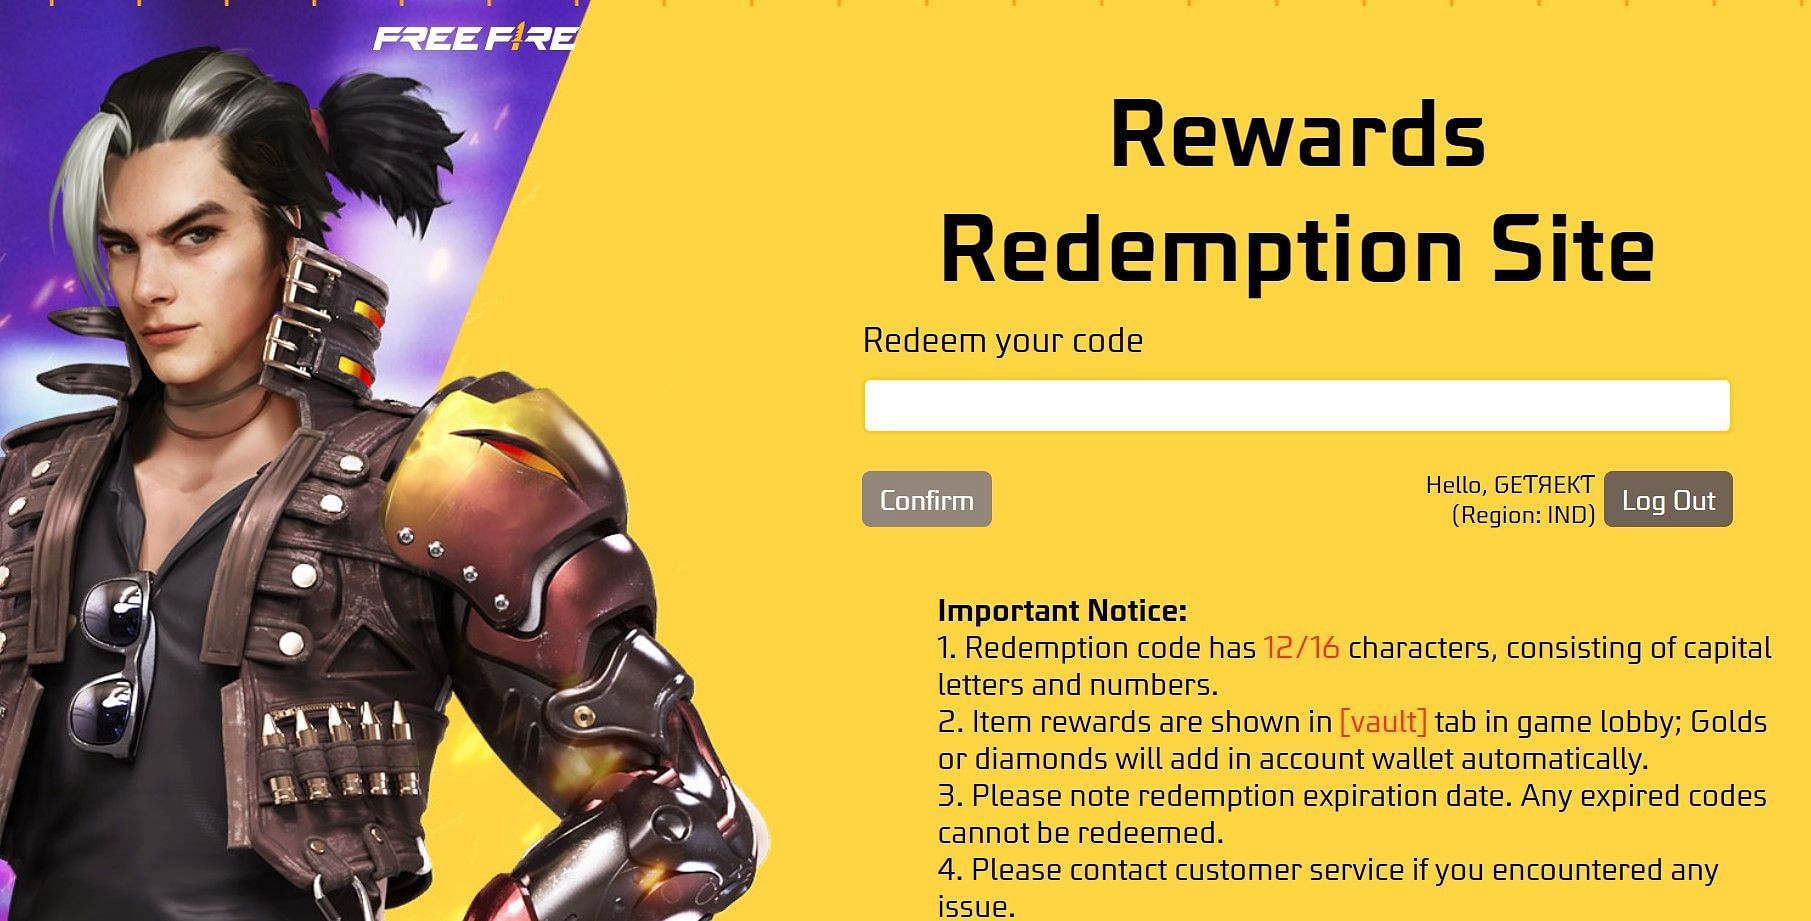 Enter the FF redemption code without making any typing mistakes (Image via Garena)